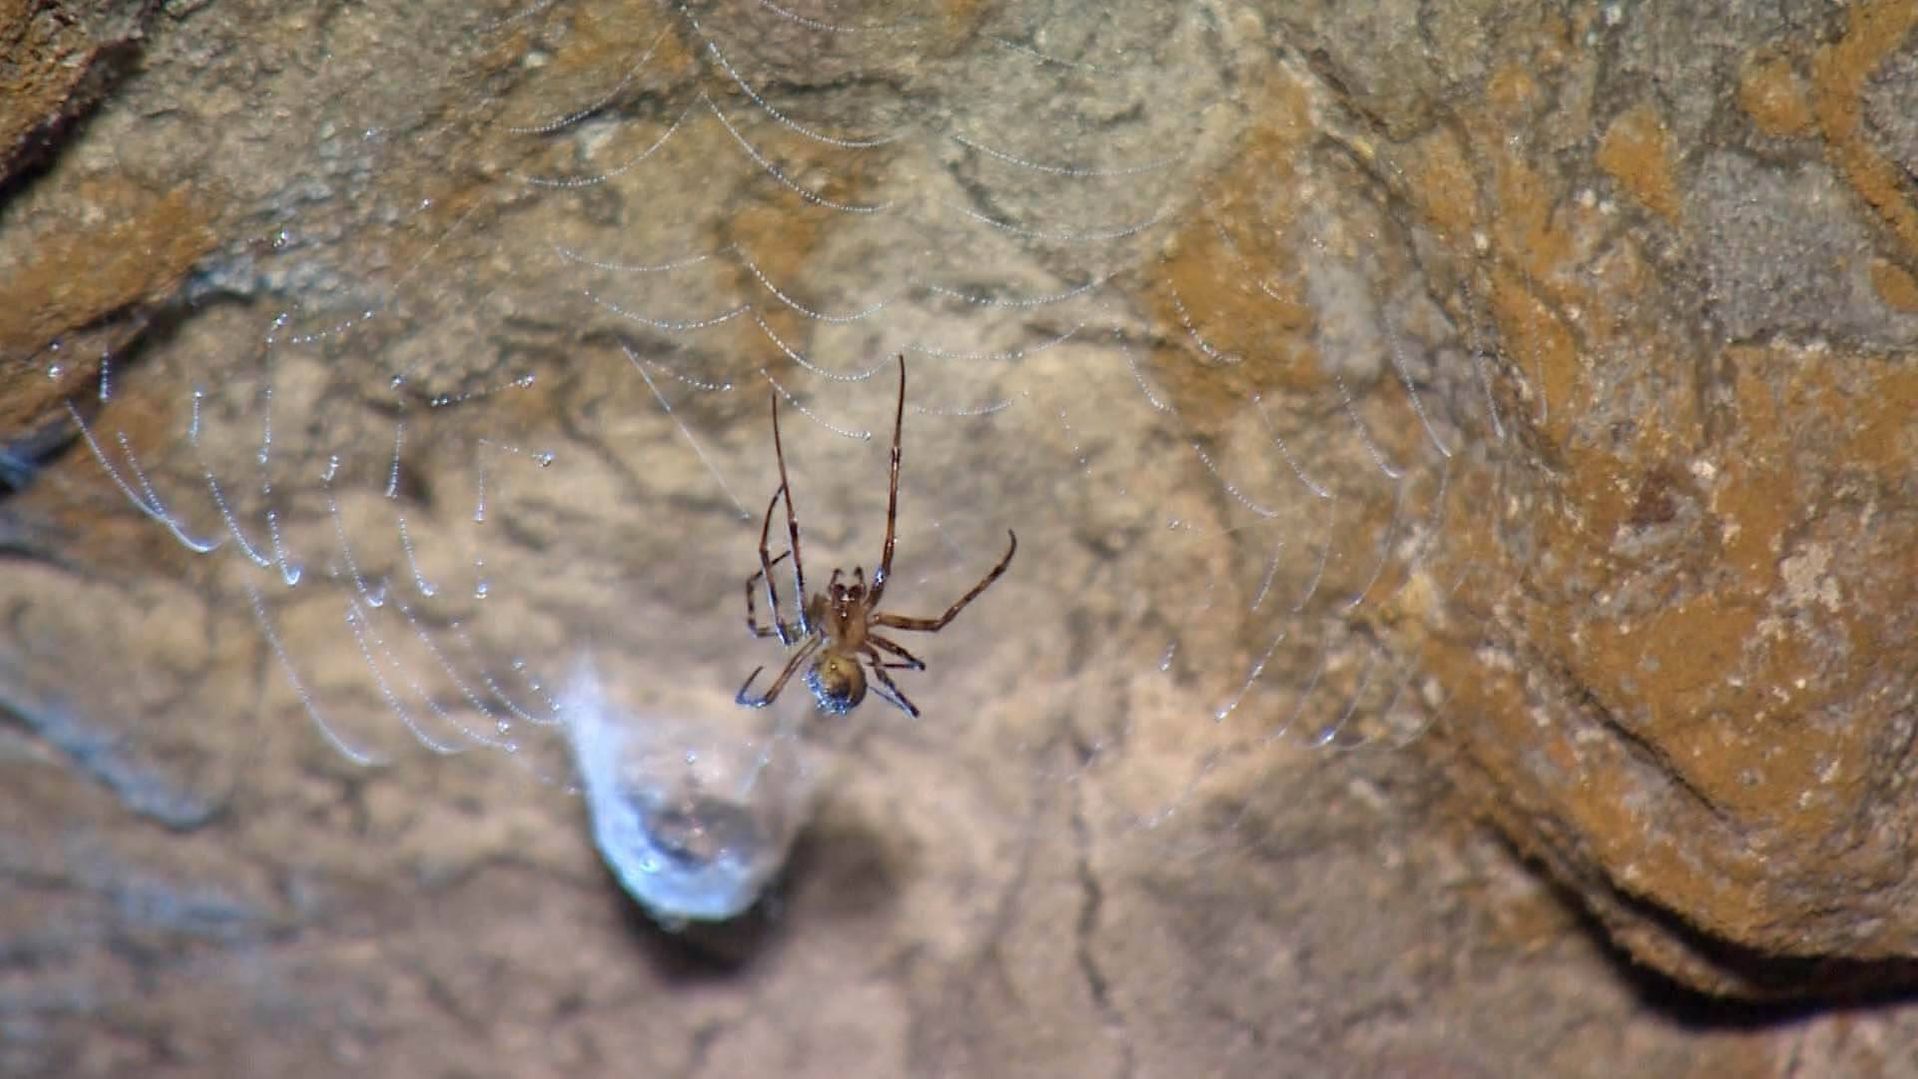 One of the many spiders living in the cave.